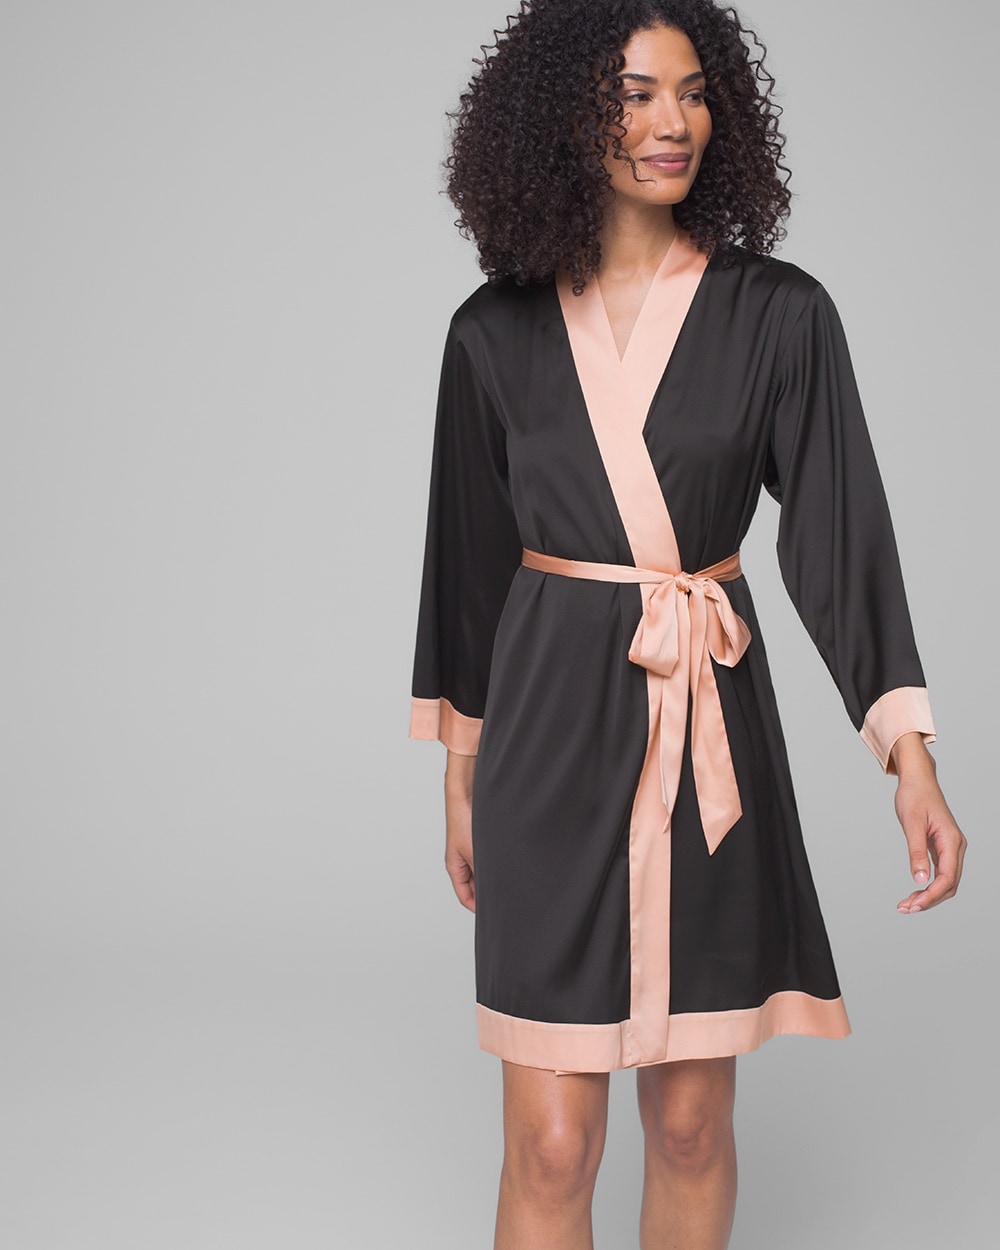 Satin and Lace Short Robe